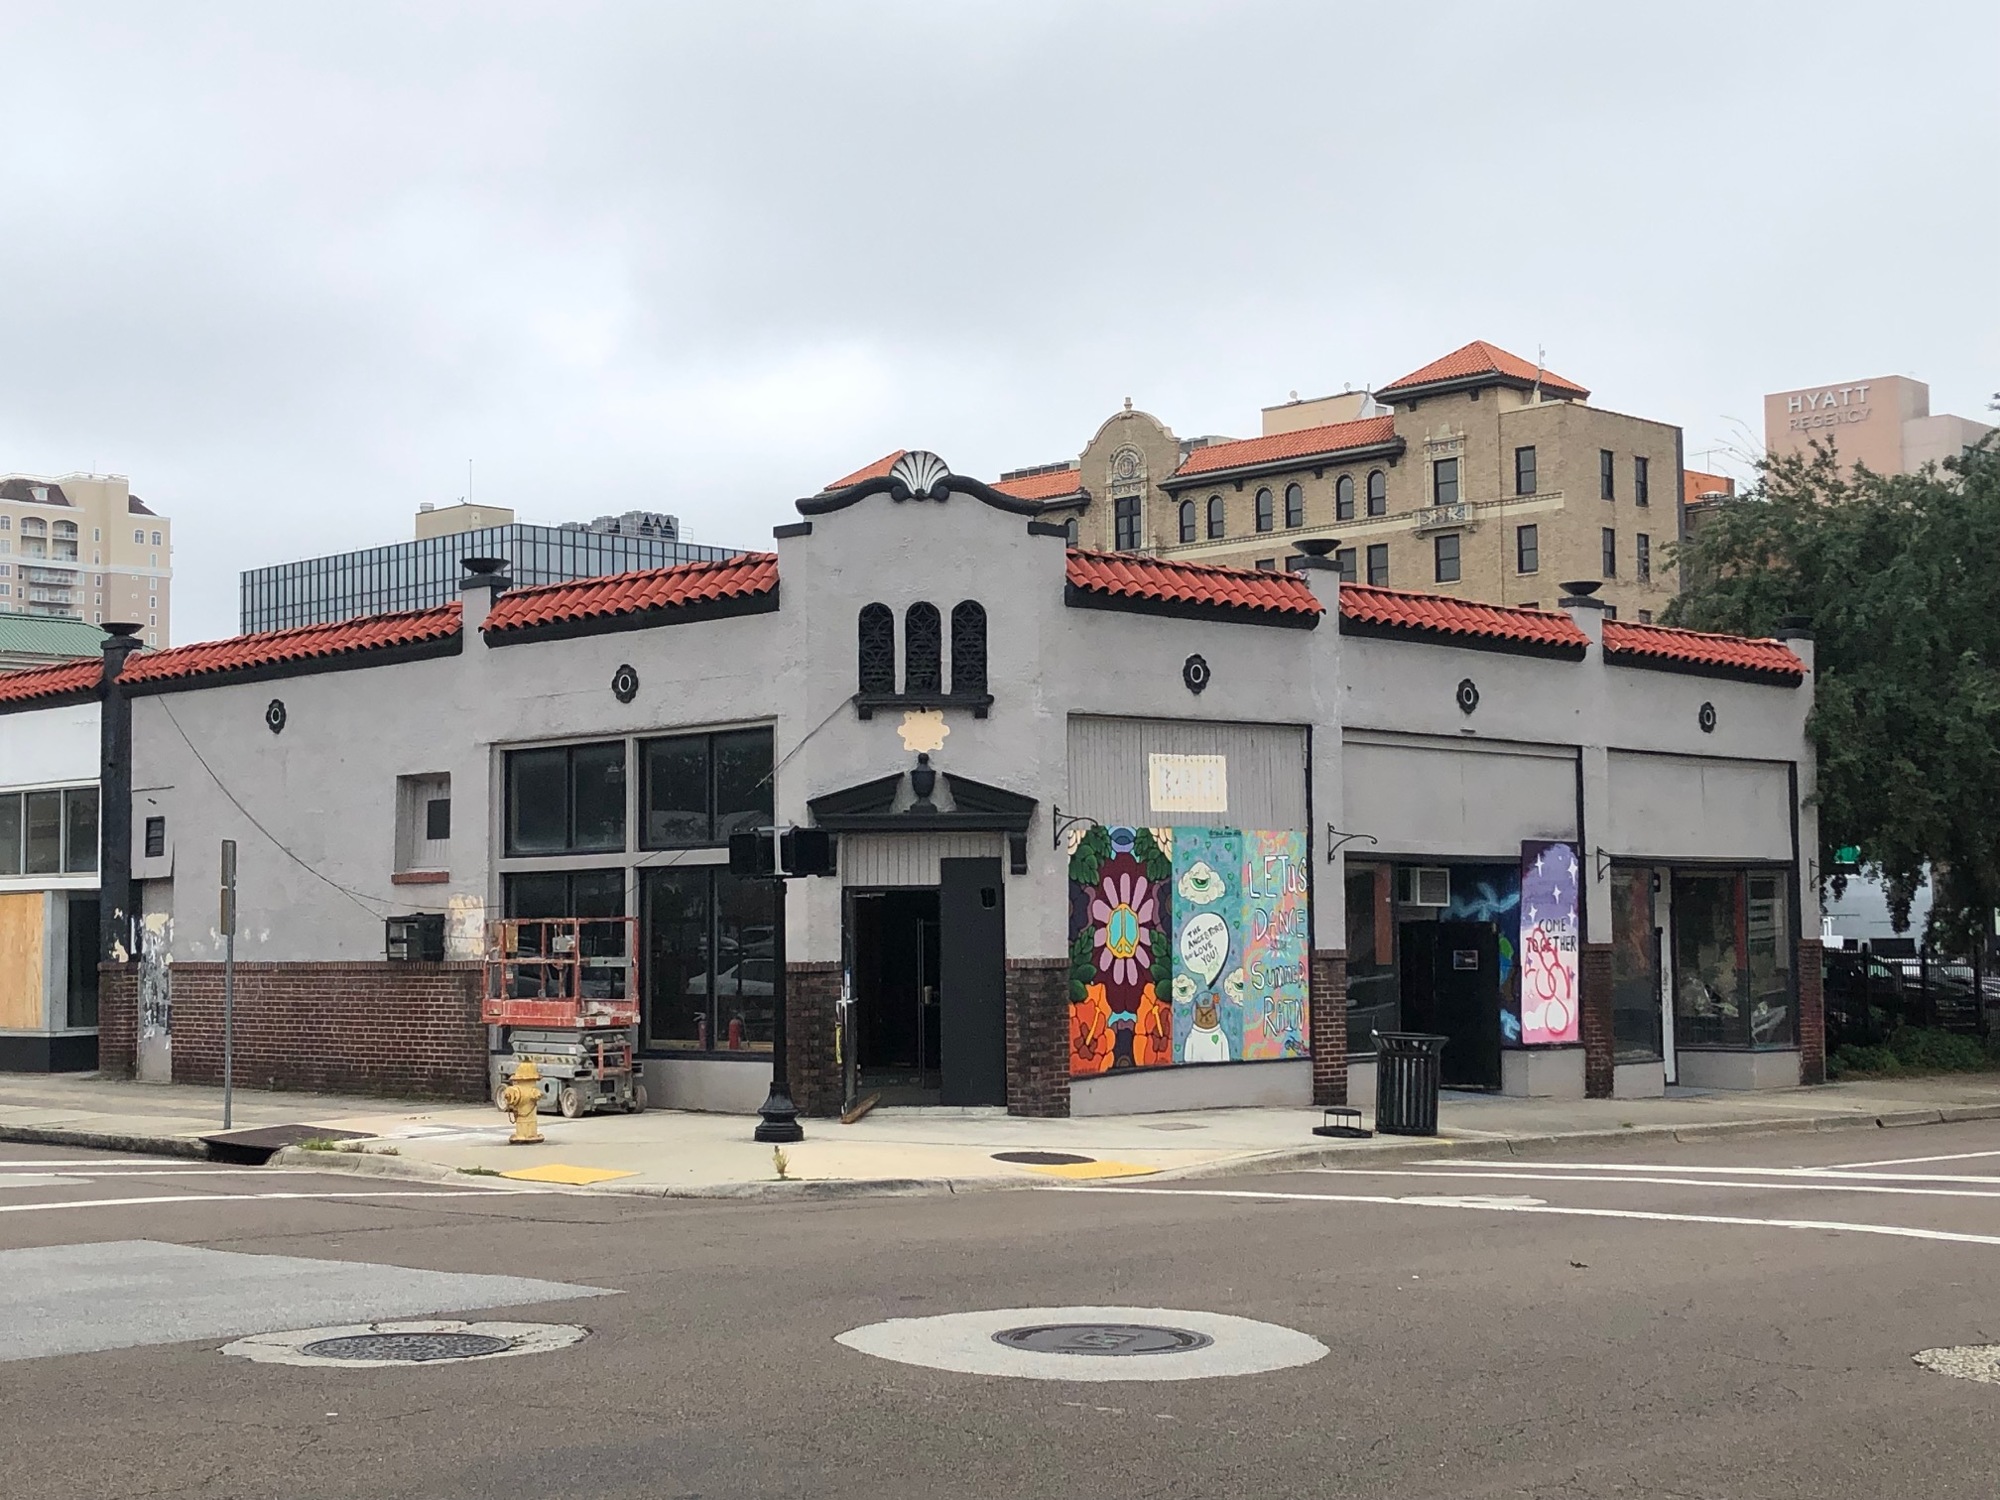 Hardwicks Bar, the former Burro Bar and London Bridge Pub space, is under renovation at 100 E. Adams St. in Downtown Jacksonville. The 3,479-square-foot space is east of the Jesse Ball duPont Center.